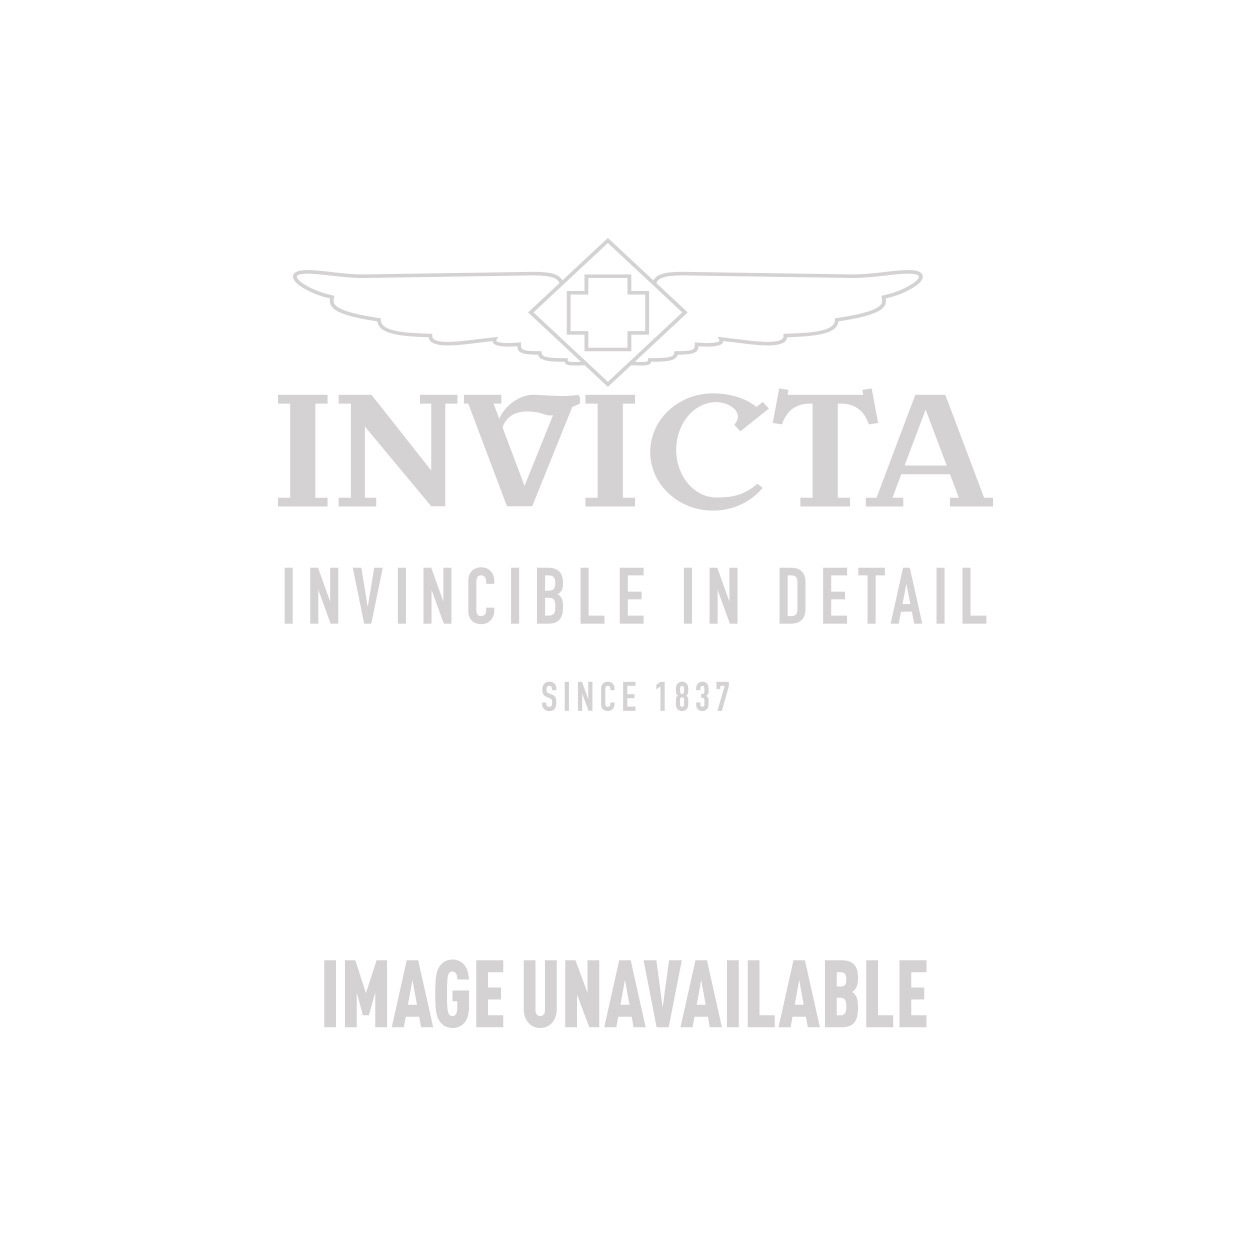 Invincible Guarantee - 100% Replacement Guarantee for Watches, Tier 7- 50-49